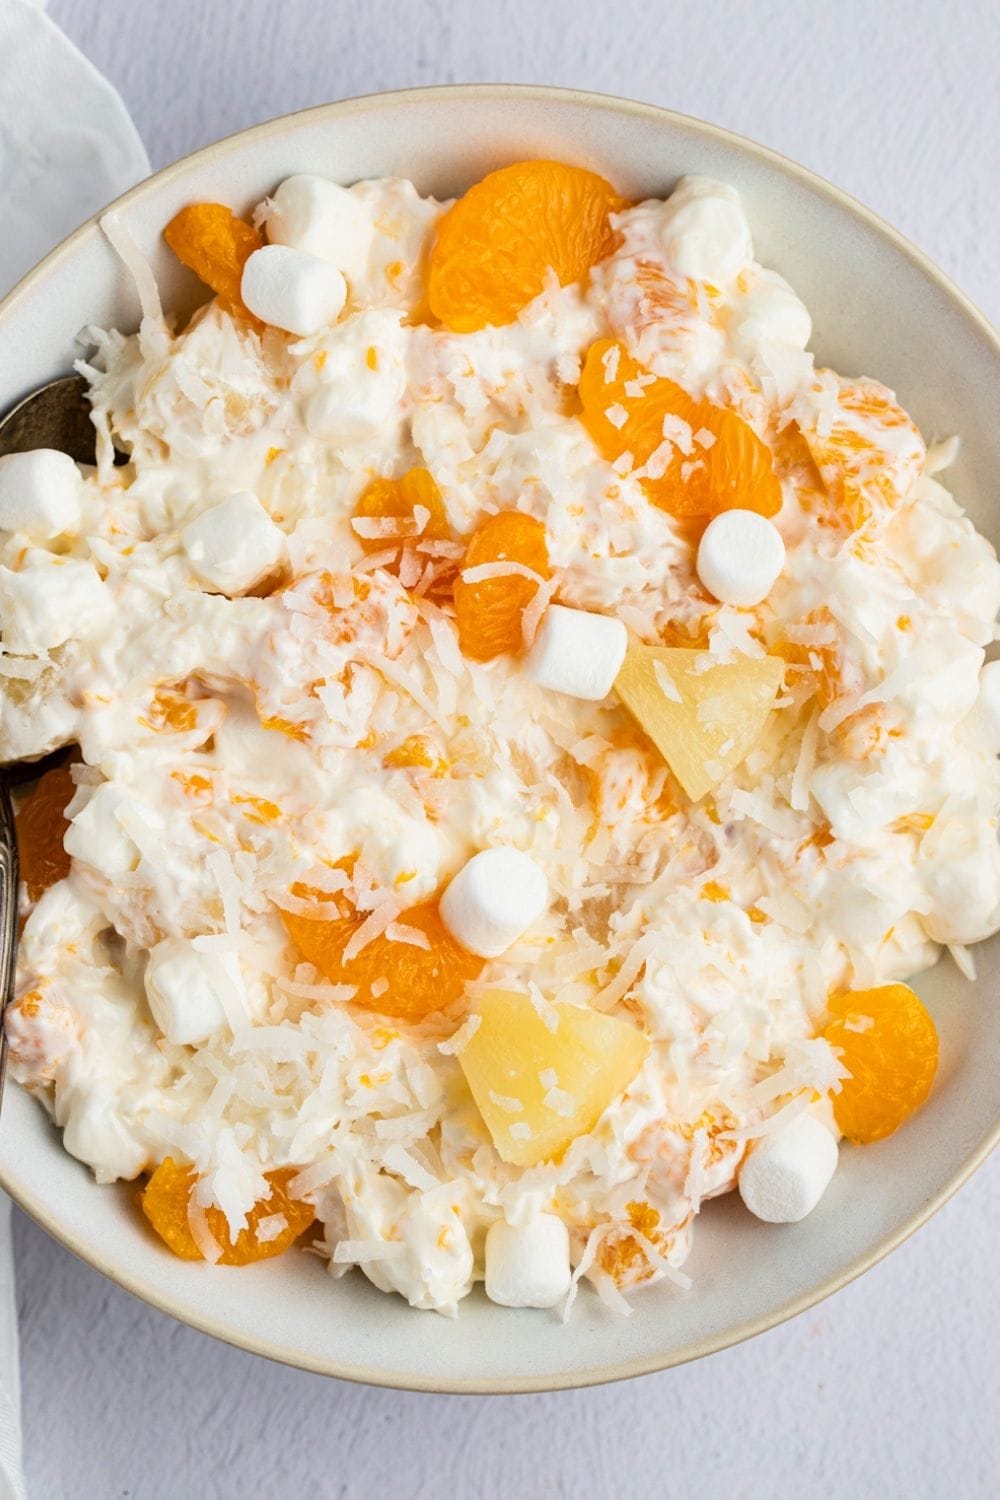 Delicious 5-Cup Salad with Marshmallows, Mandarin Oranges, Pineapples, Coconut, and Sour Cream